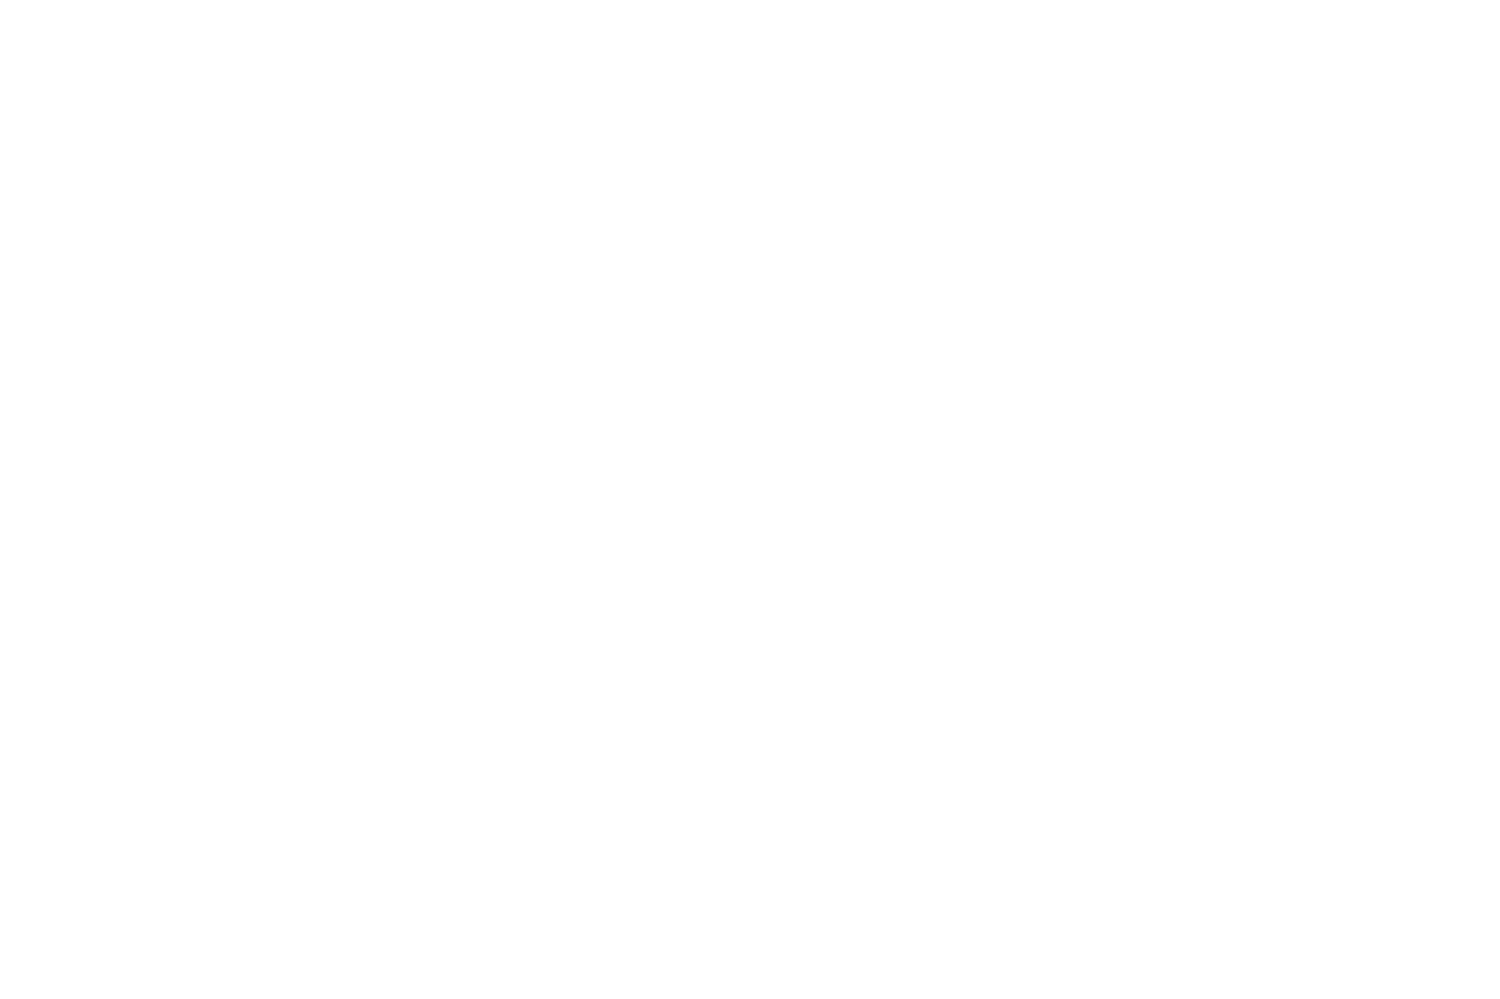 Empowered by Sarah